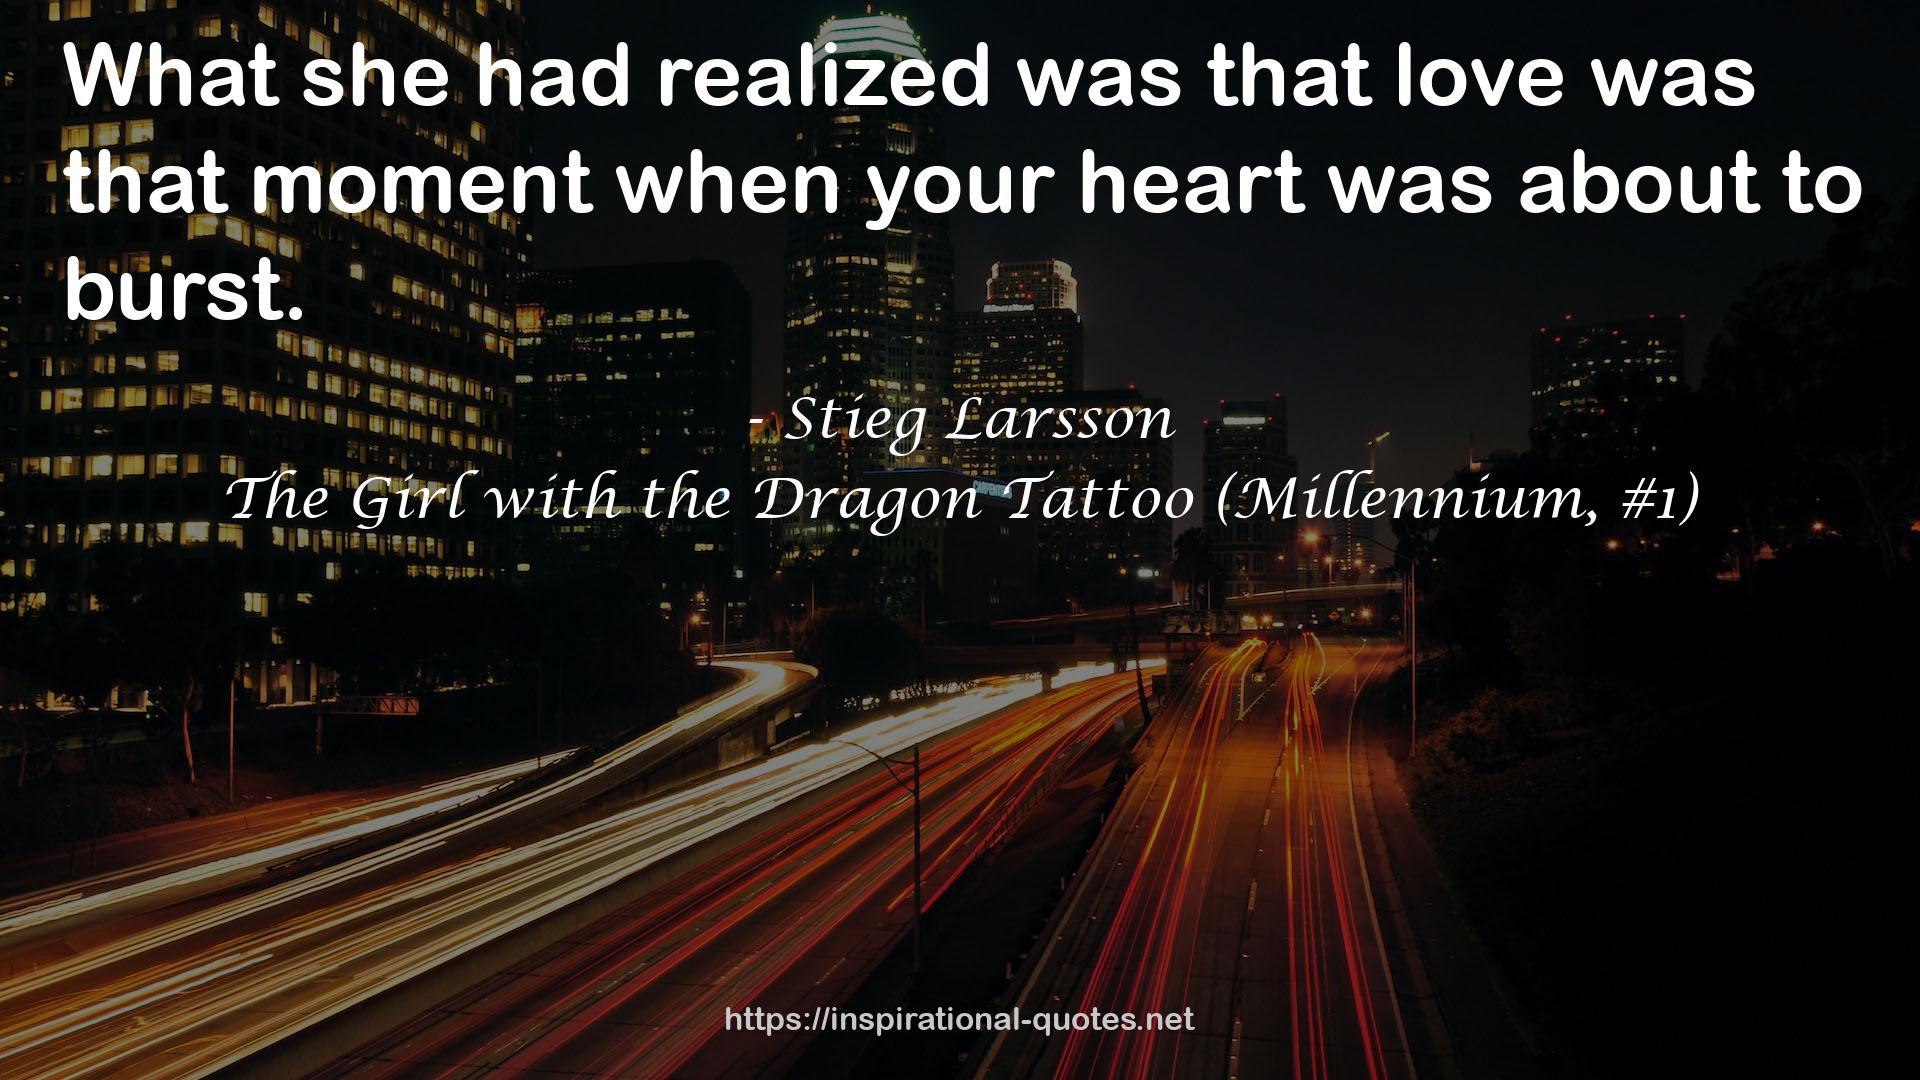 The Girl with the Dragon Tattoo (Millennium, #1) QUOTES